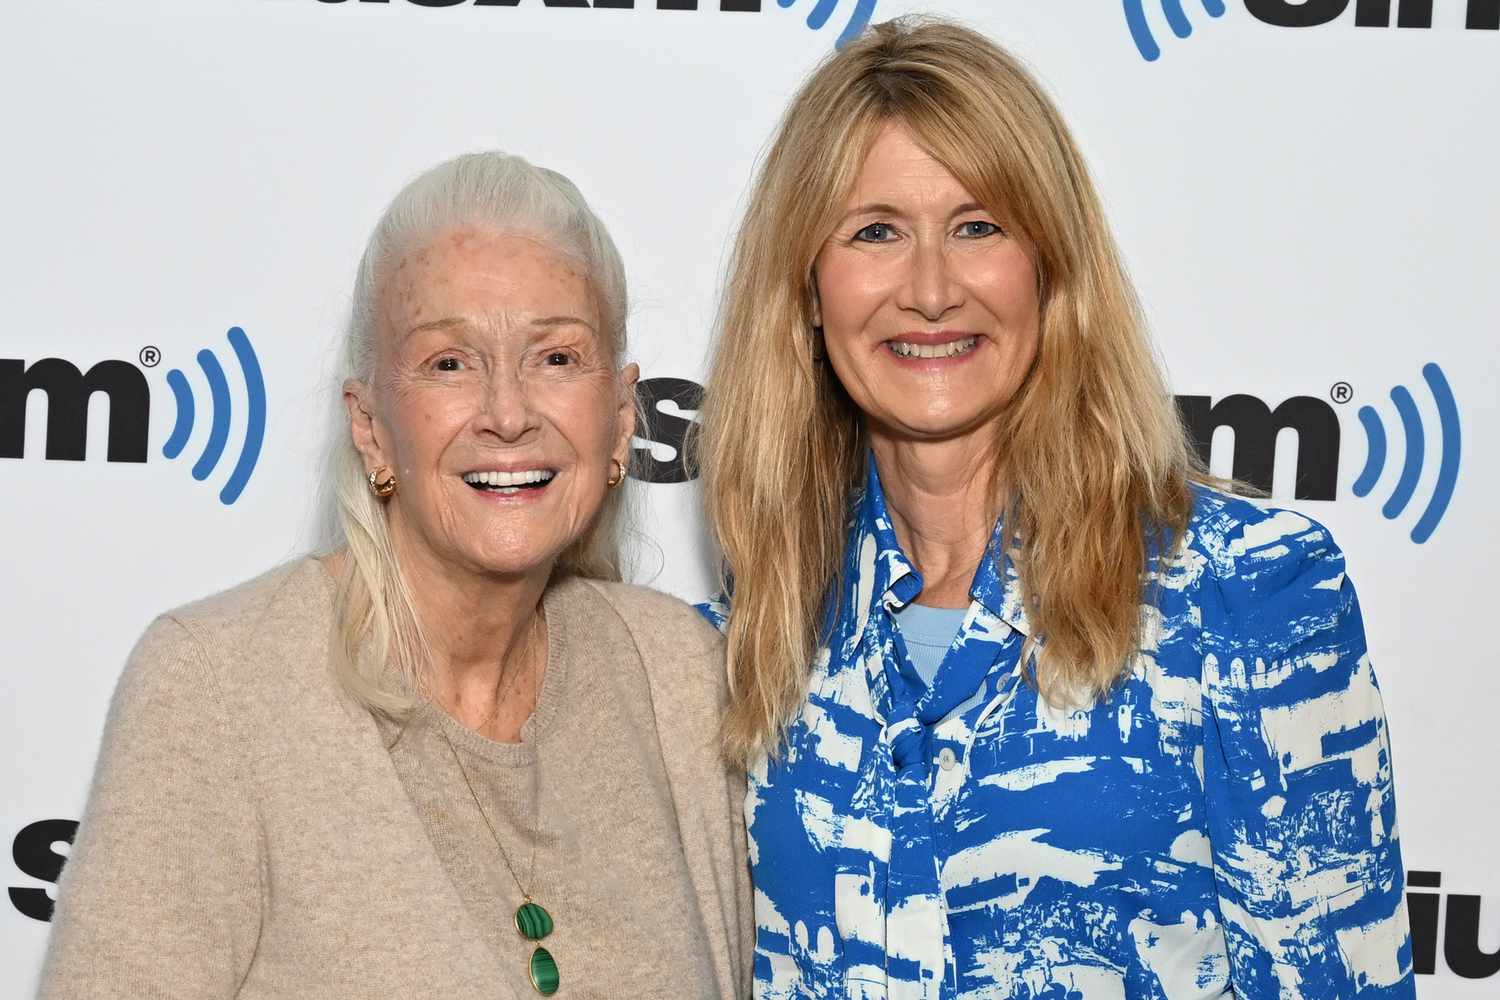 Laura Dern says her mom, actress Diane Ladd, gave her a travel case of condoms when she was 16